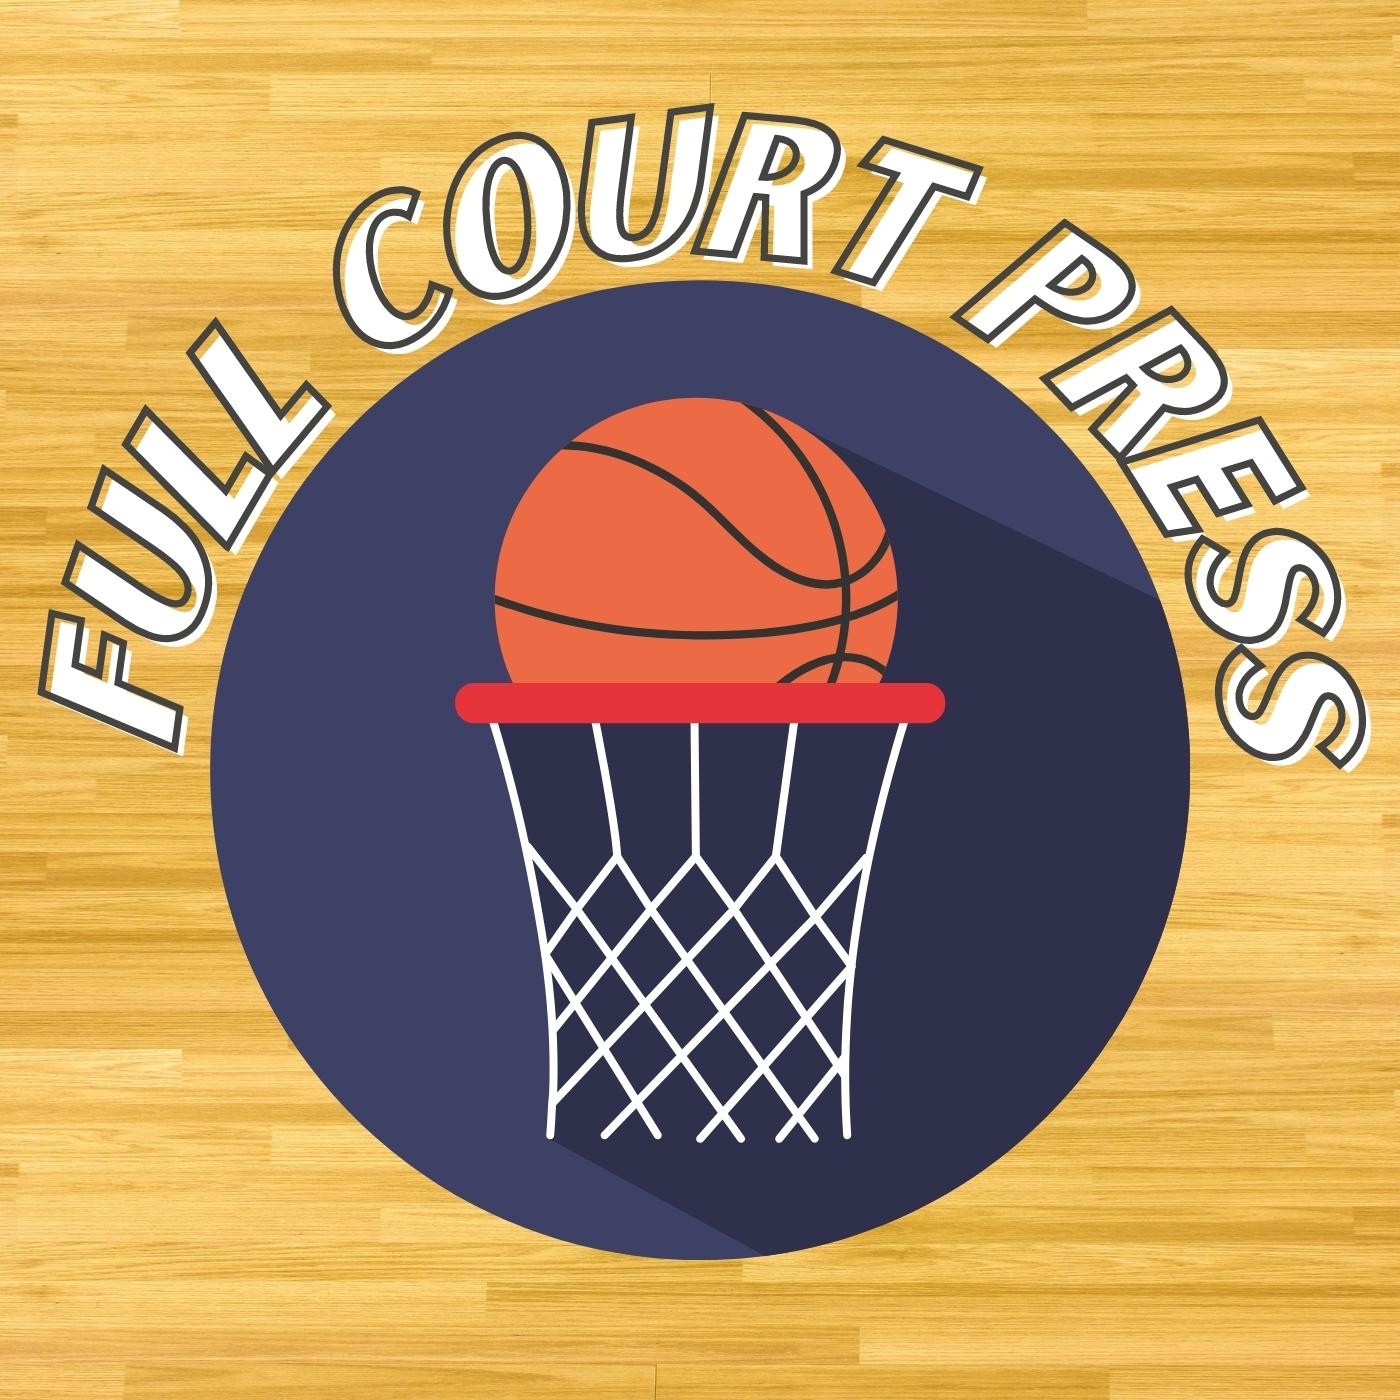 Full Court Press S02.E11: Top 10 Small Forwards and Power Forwards of All-Time